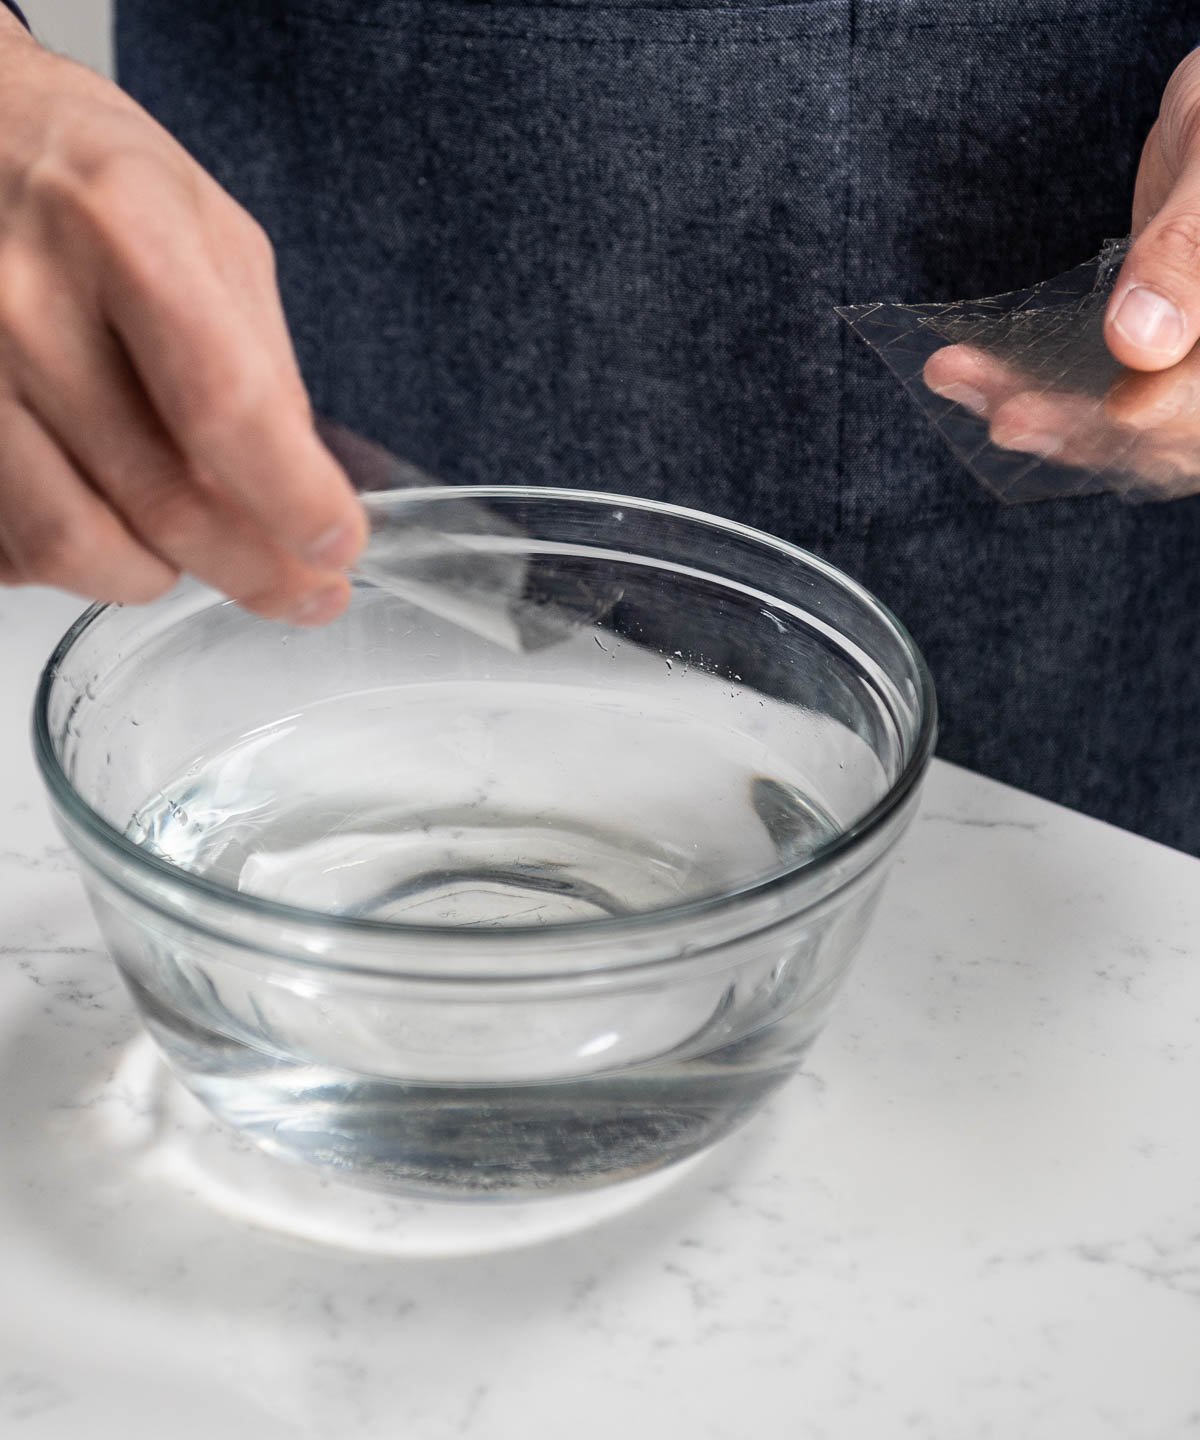 holding gelatin sheets above bowl of water